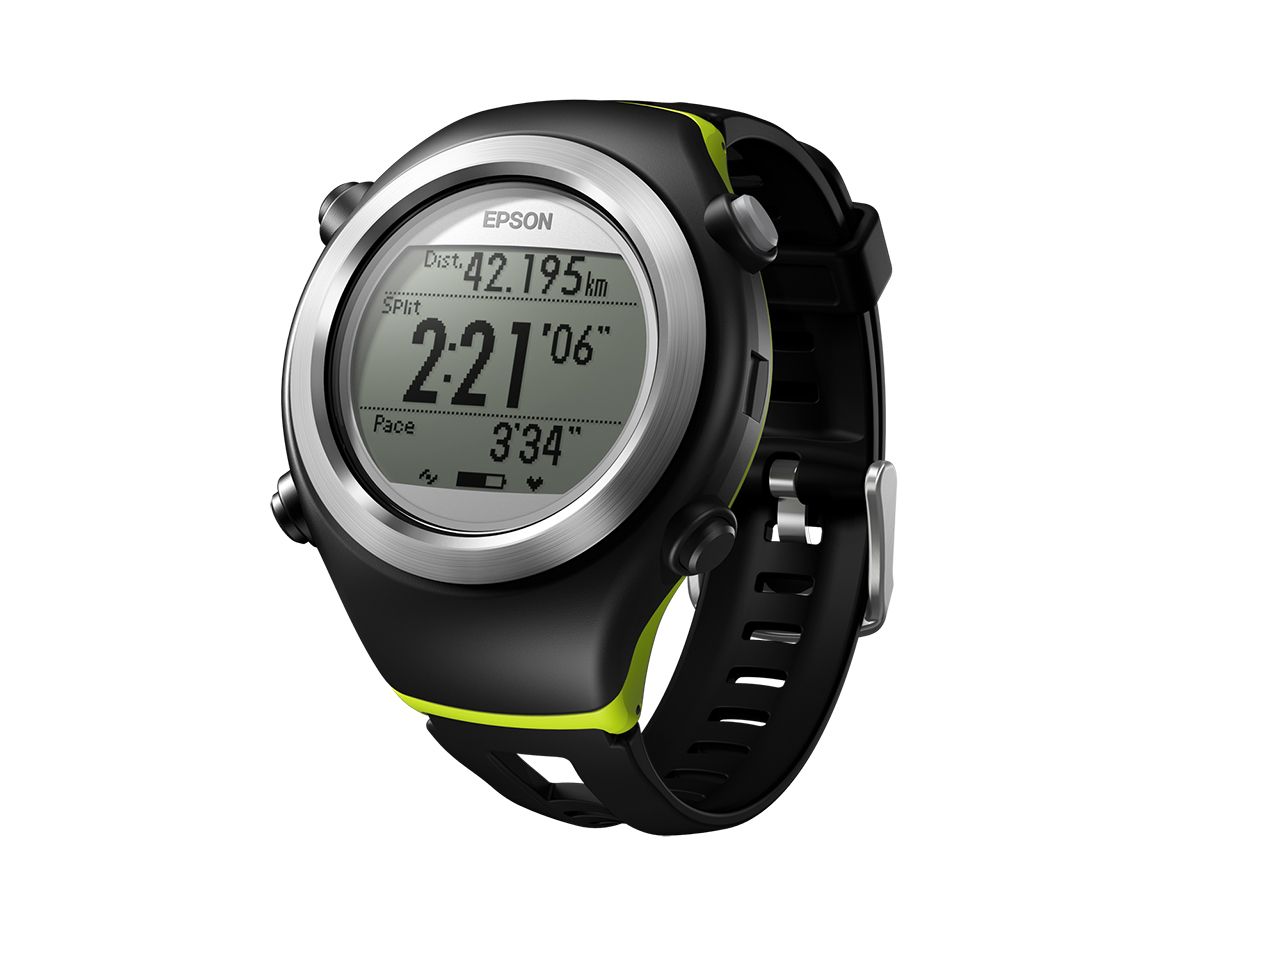 epson gets tracking with runsense gps watches and pulsense hr and activity trackers image 2